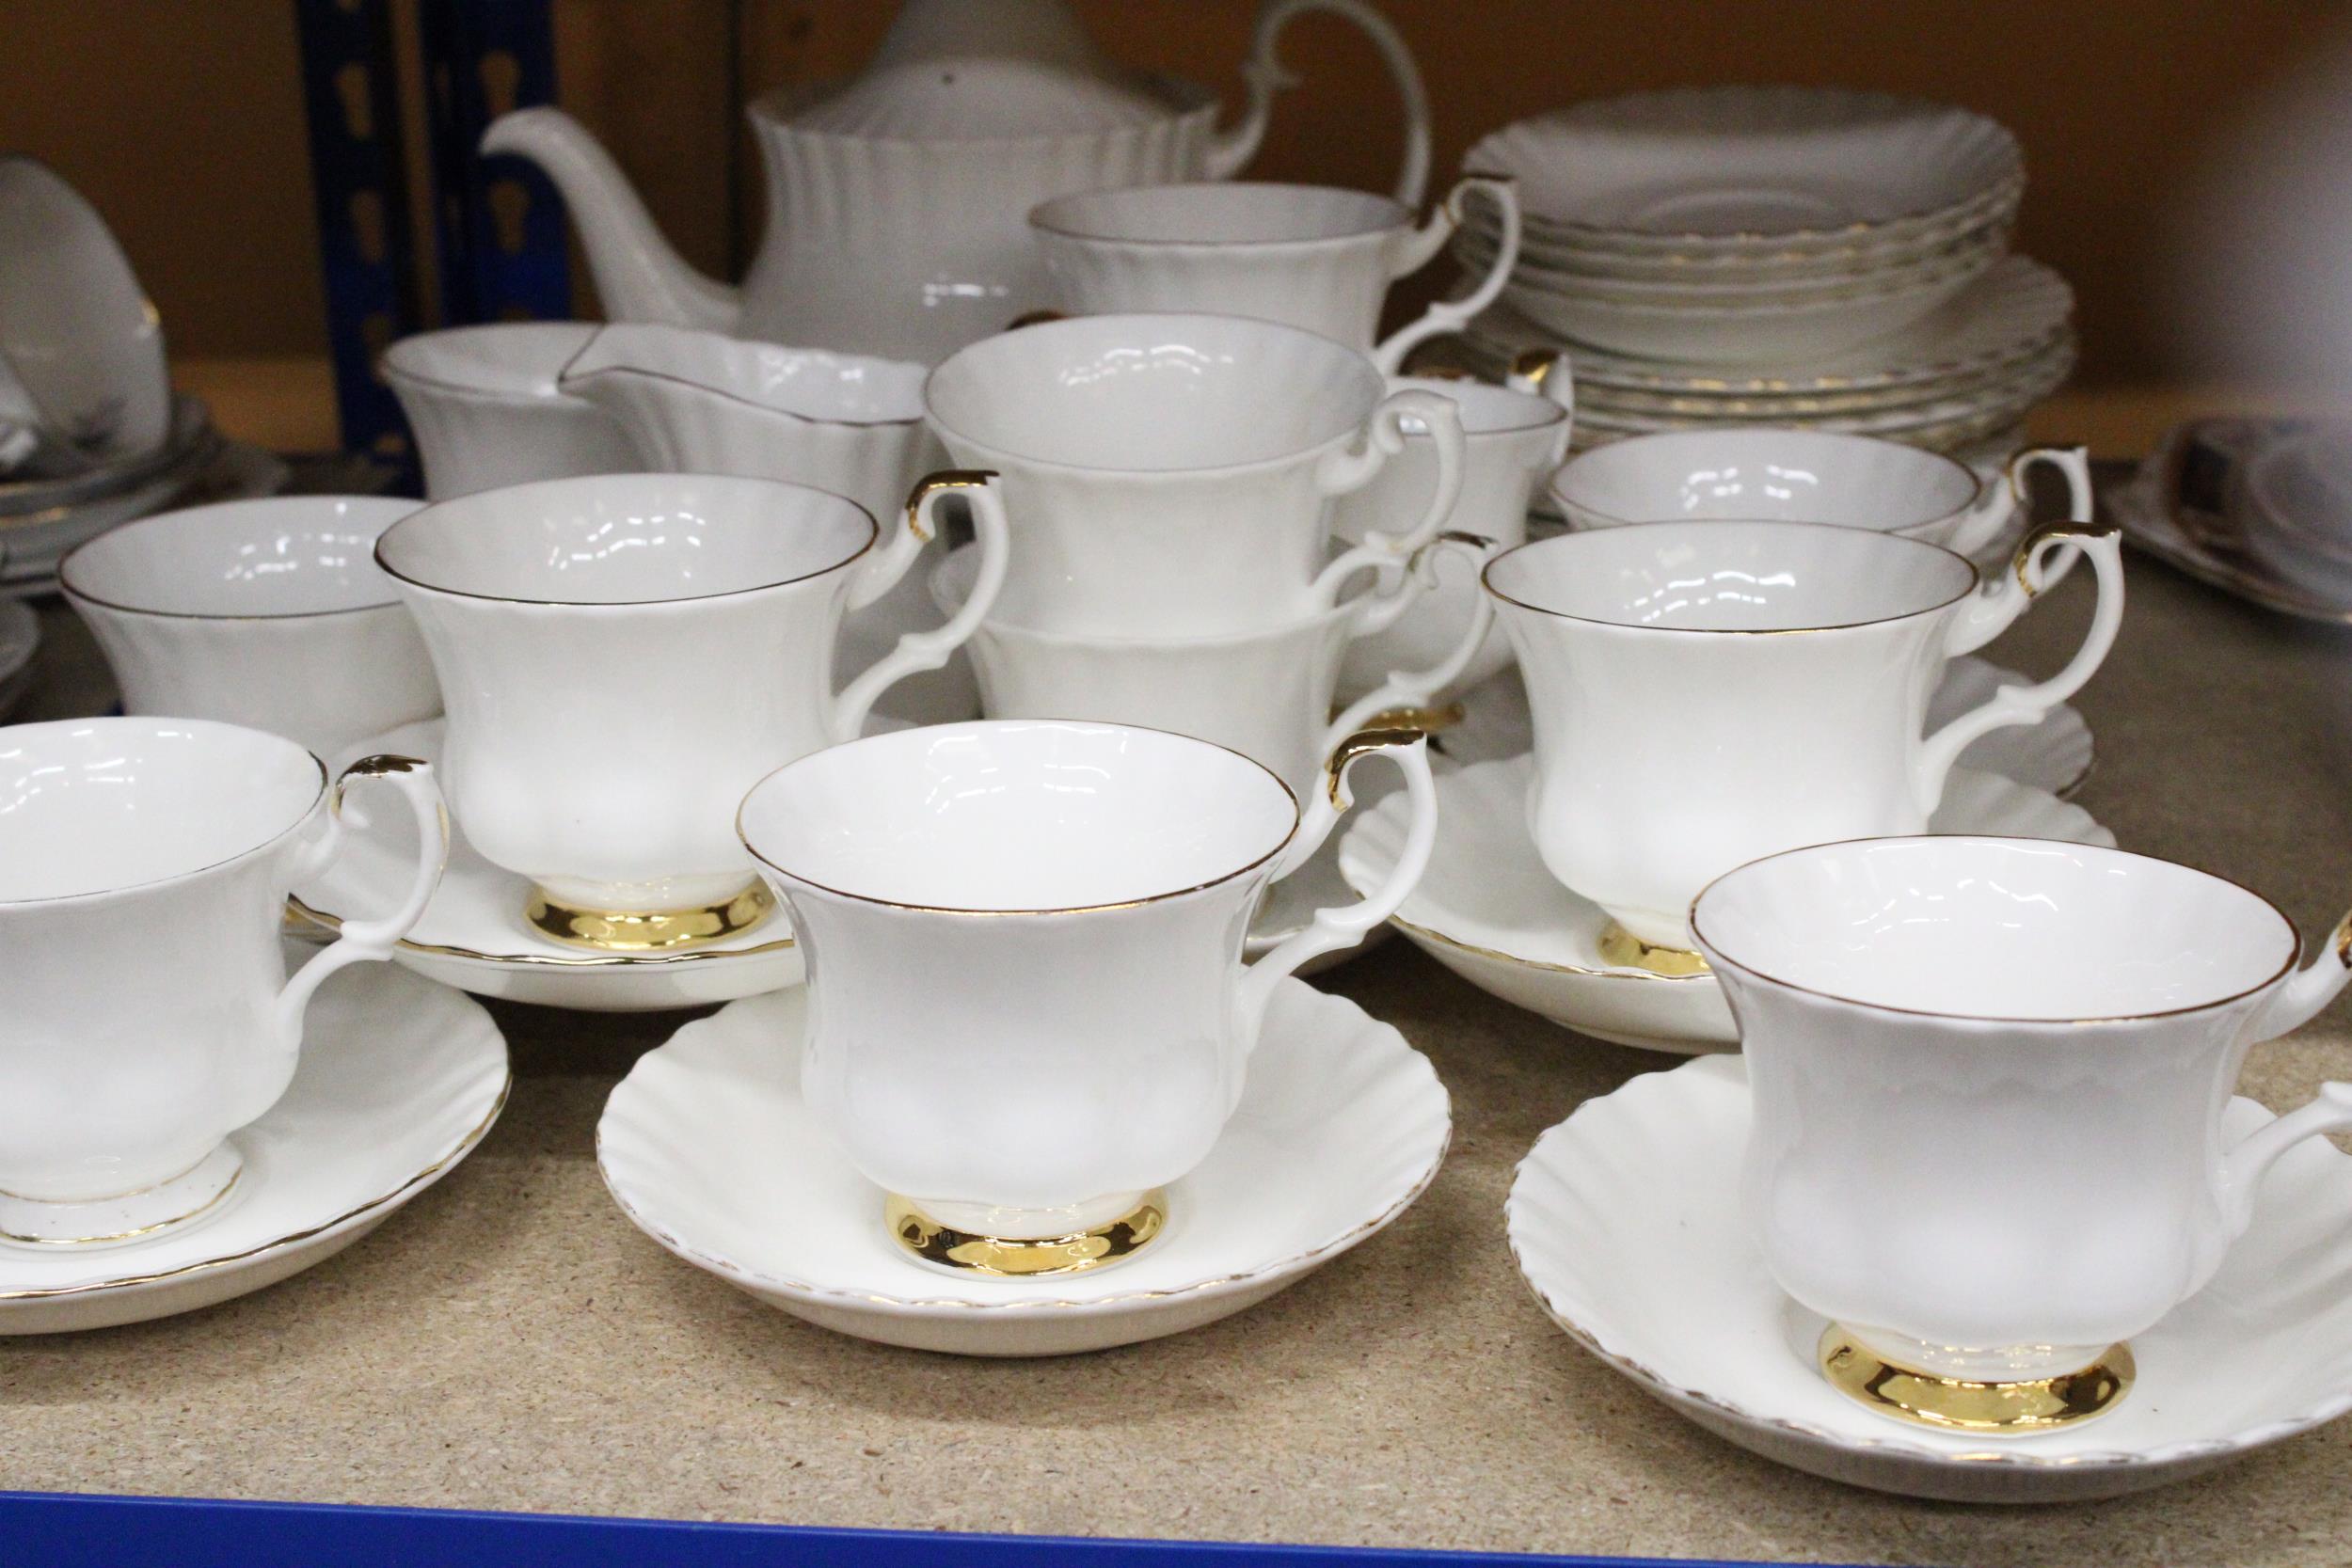 A ROYAL ALBERT "VAL DOR" EMPIRE WHITE, GOLD DECOR TEA SET TO INCLUDE CUPS, SAUCERS, SIDEPLATES, - Image 5 of 6